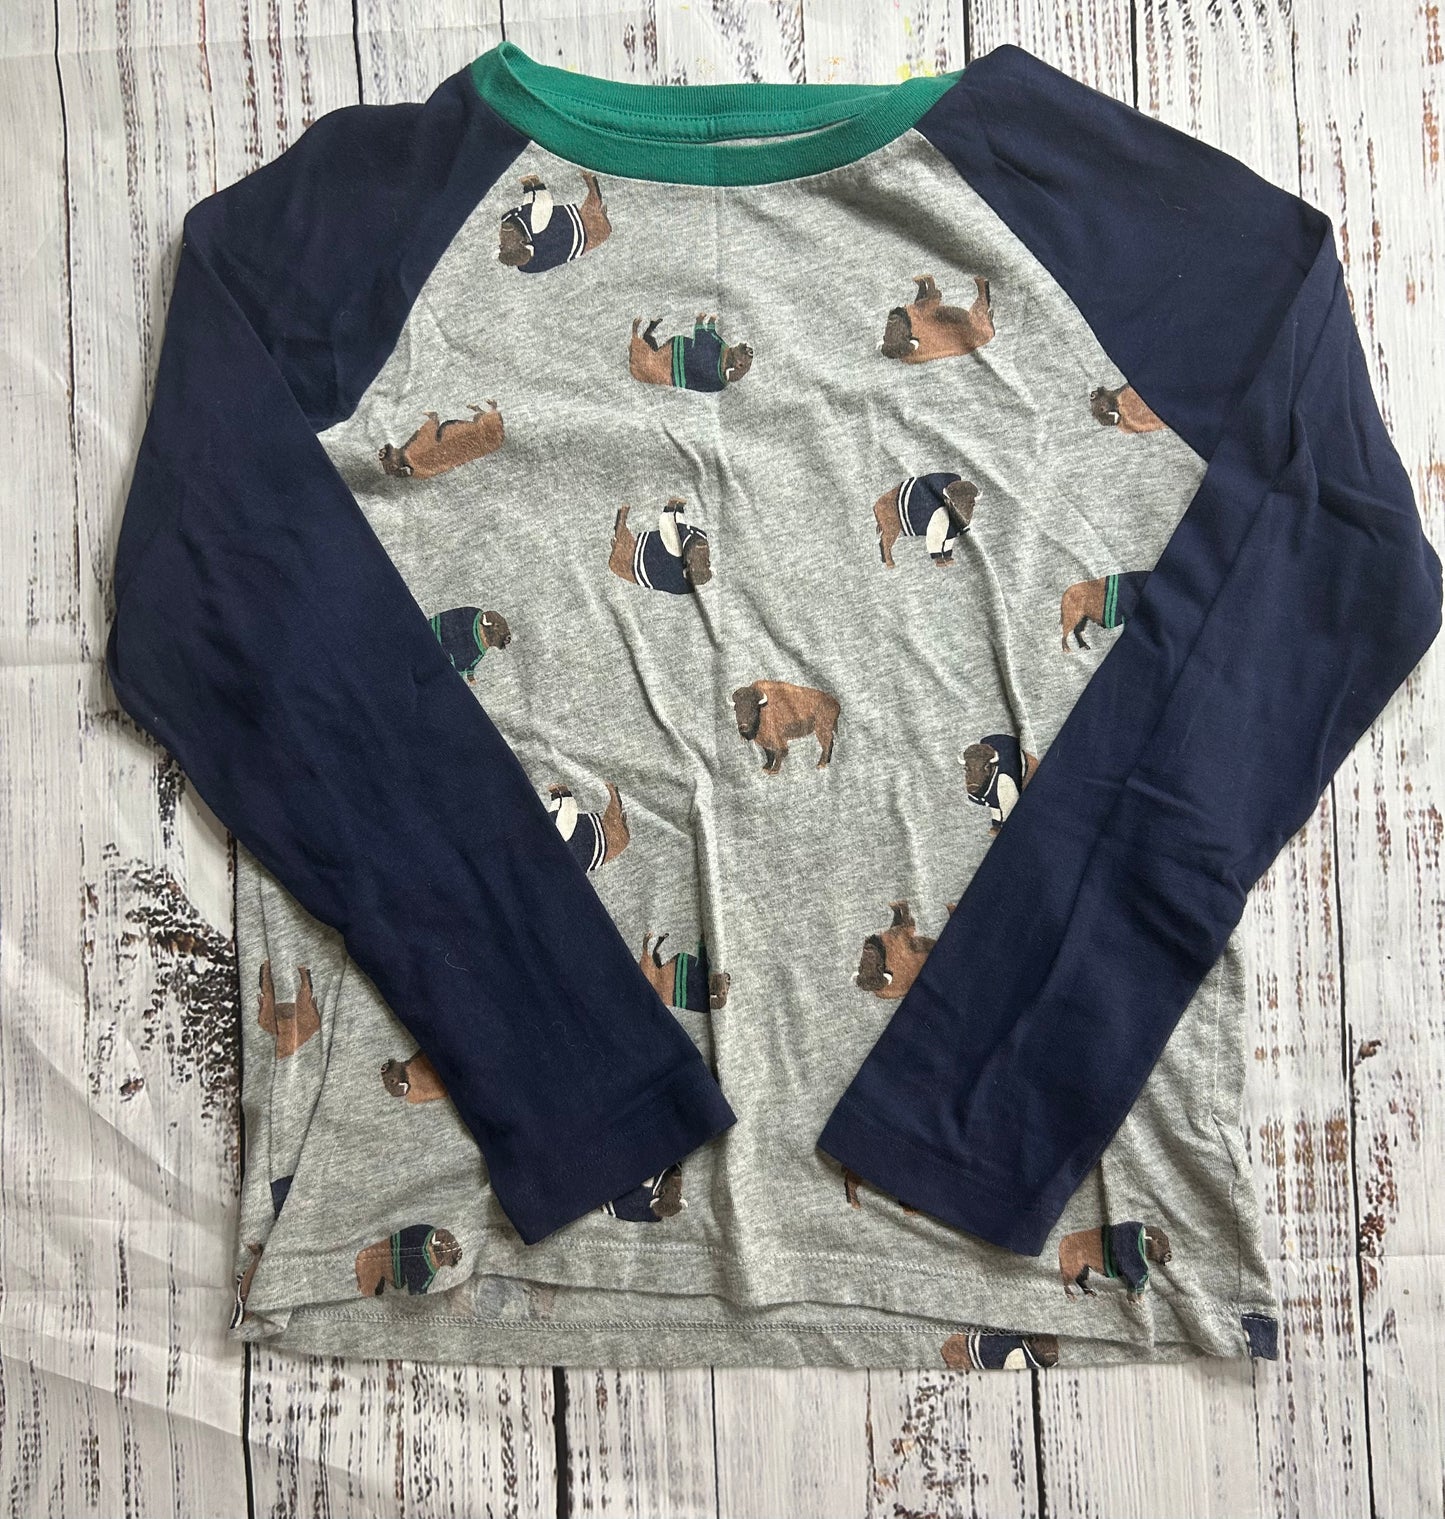 Old Navy size L 10-12 long sleeve shirt